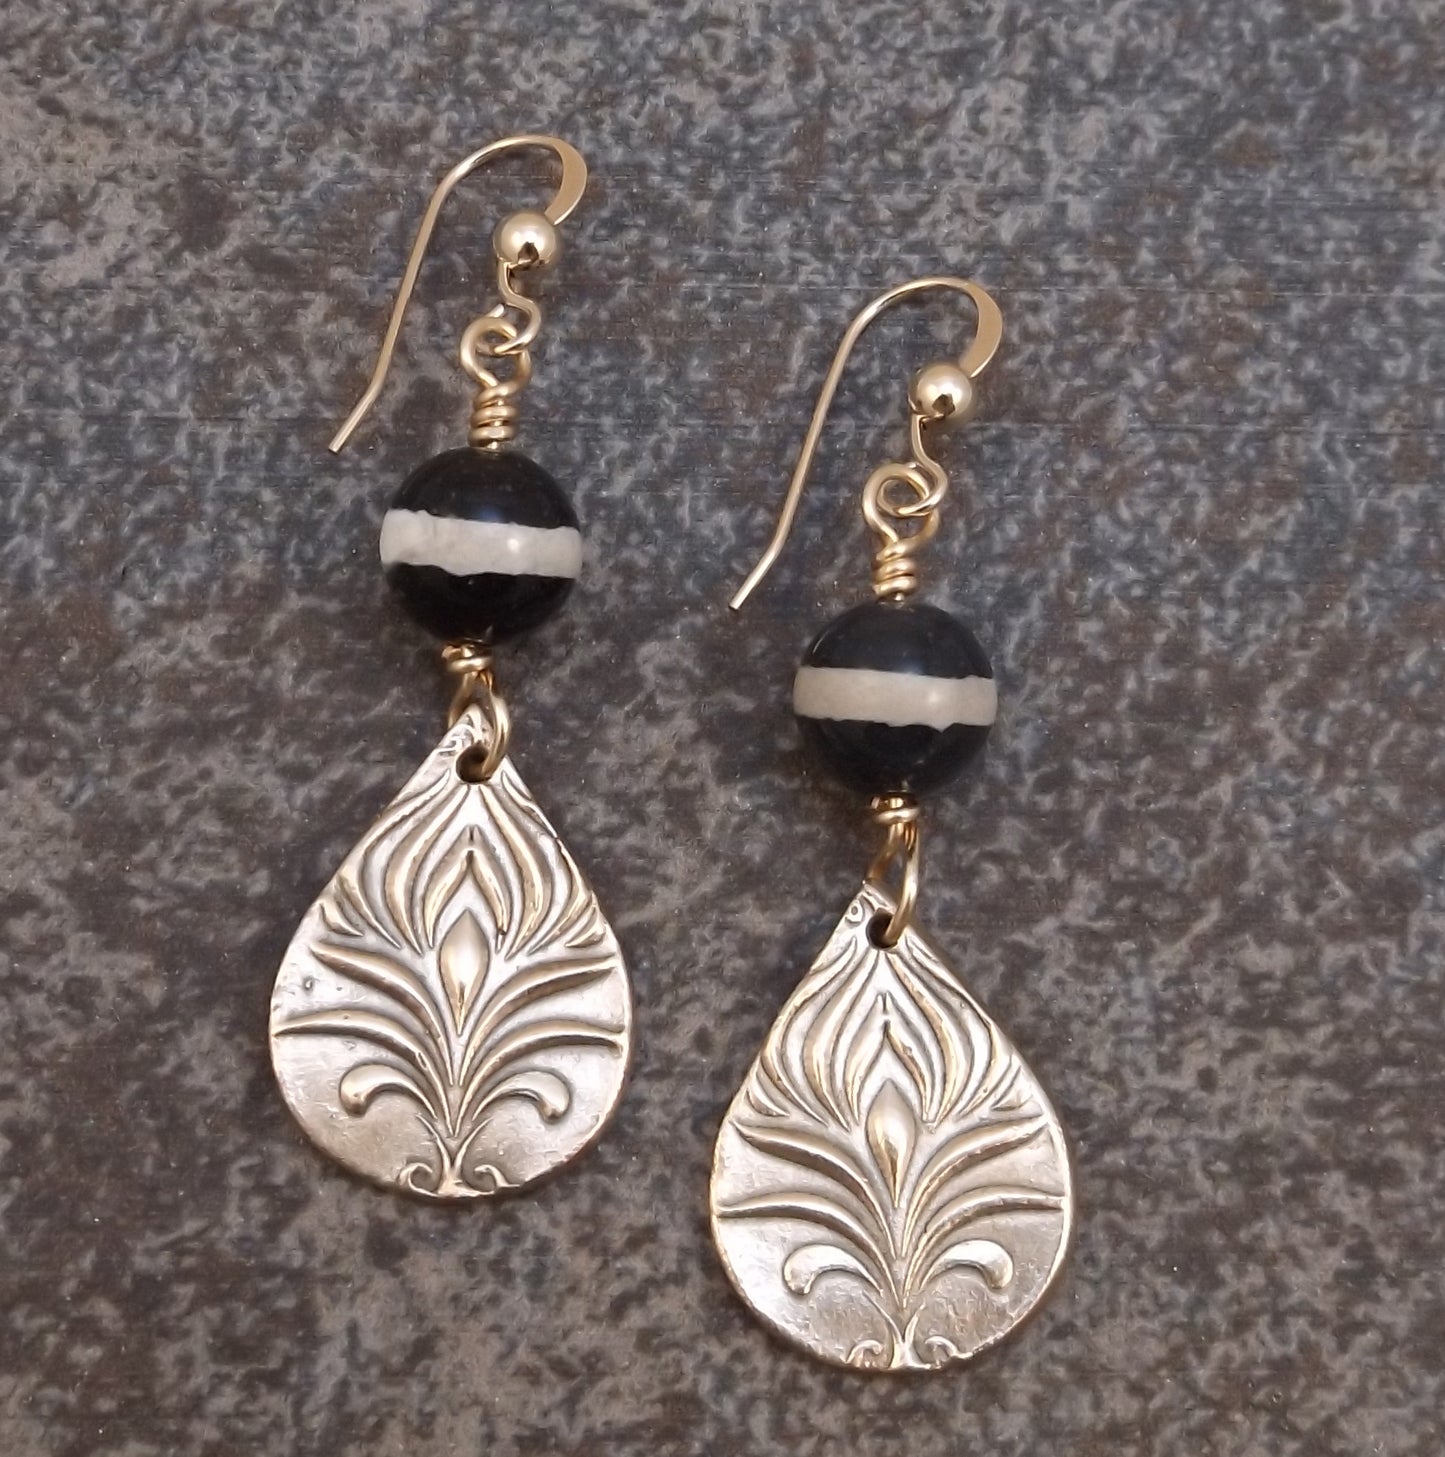 Bronze and Stone Earrings